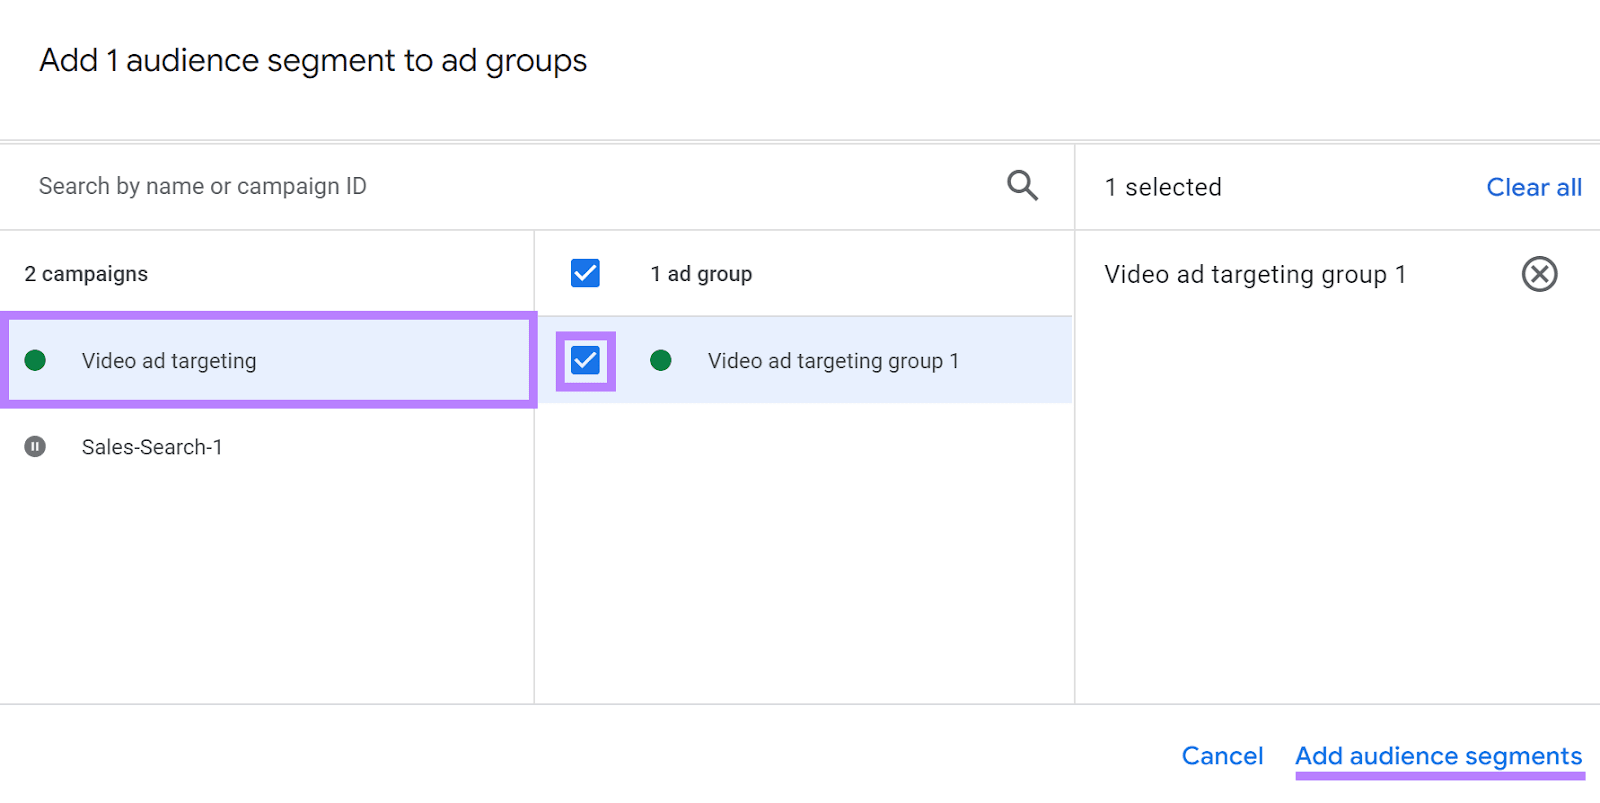 “Add audience segments" to "Video ad targeting" campaign